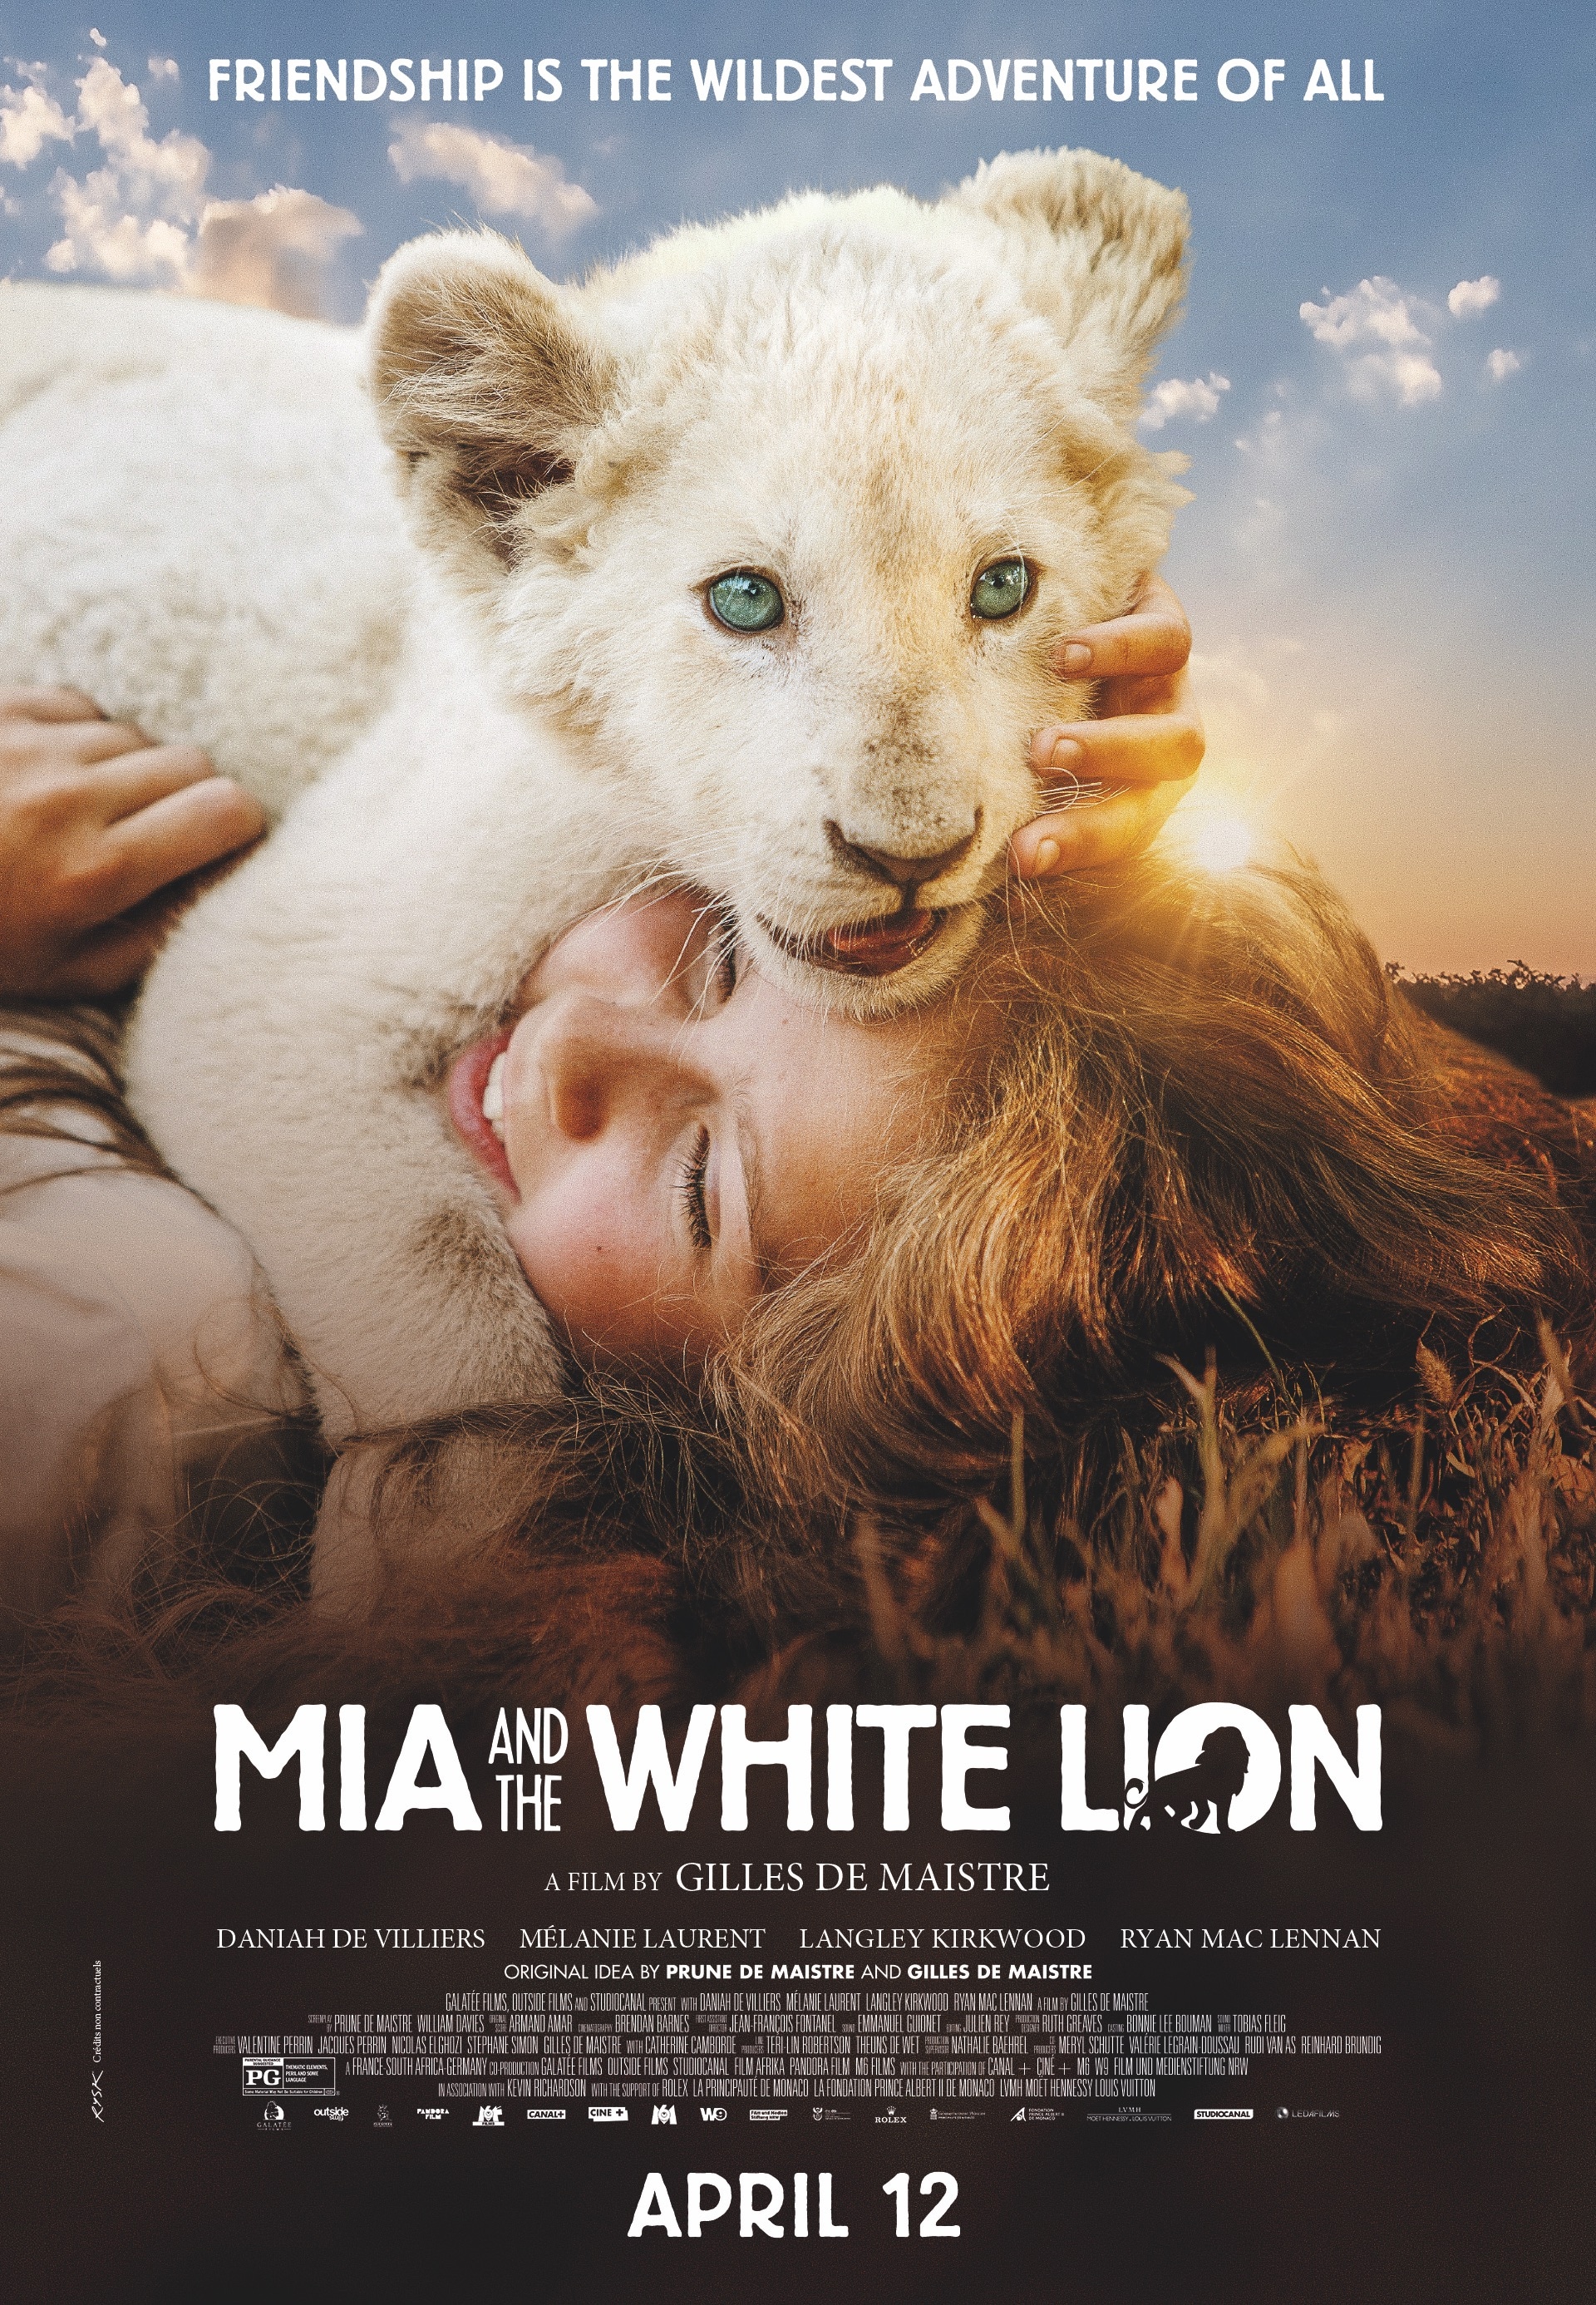 CONTEST: Win Passes to the Advance Screening of Mia and the White Lion